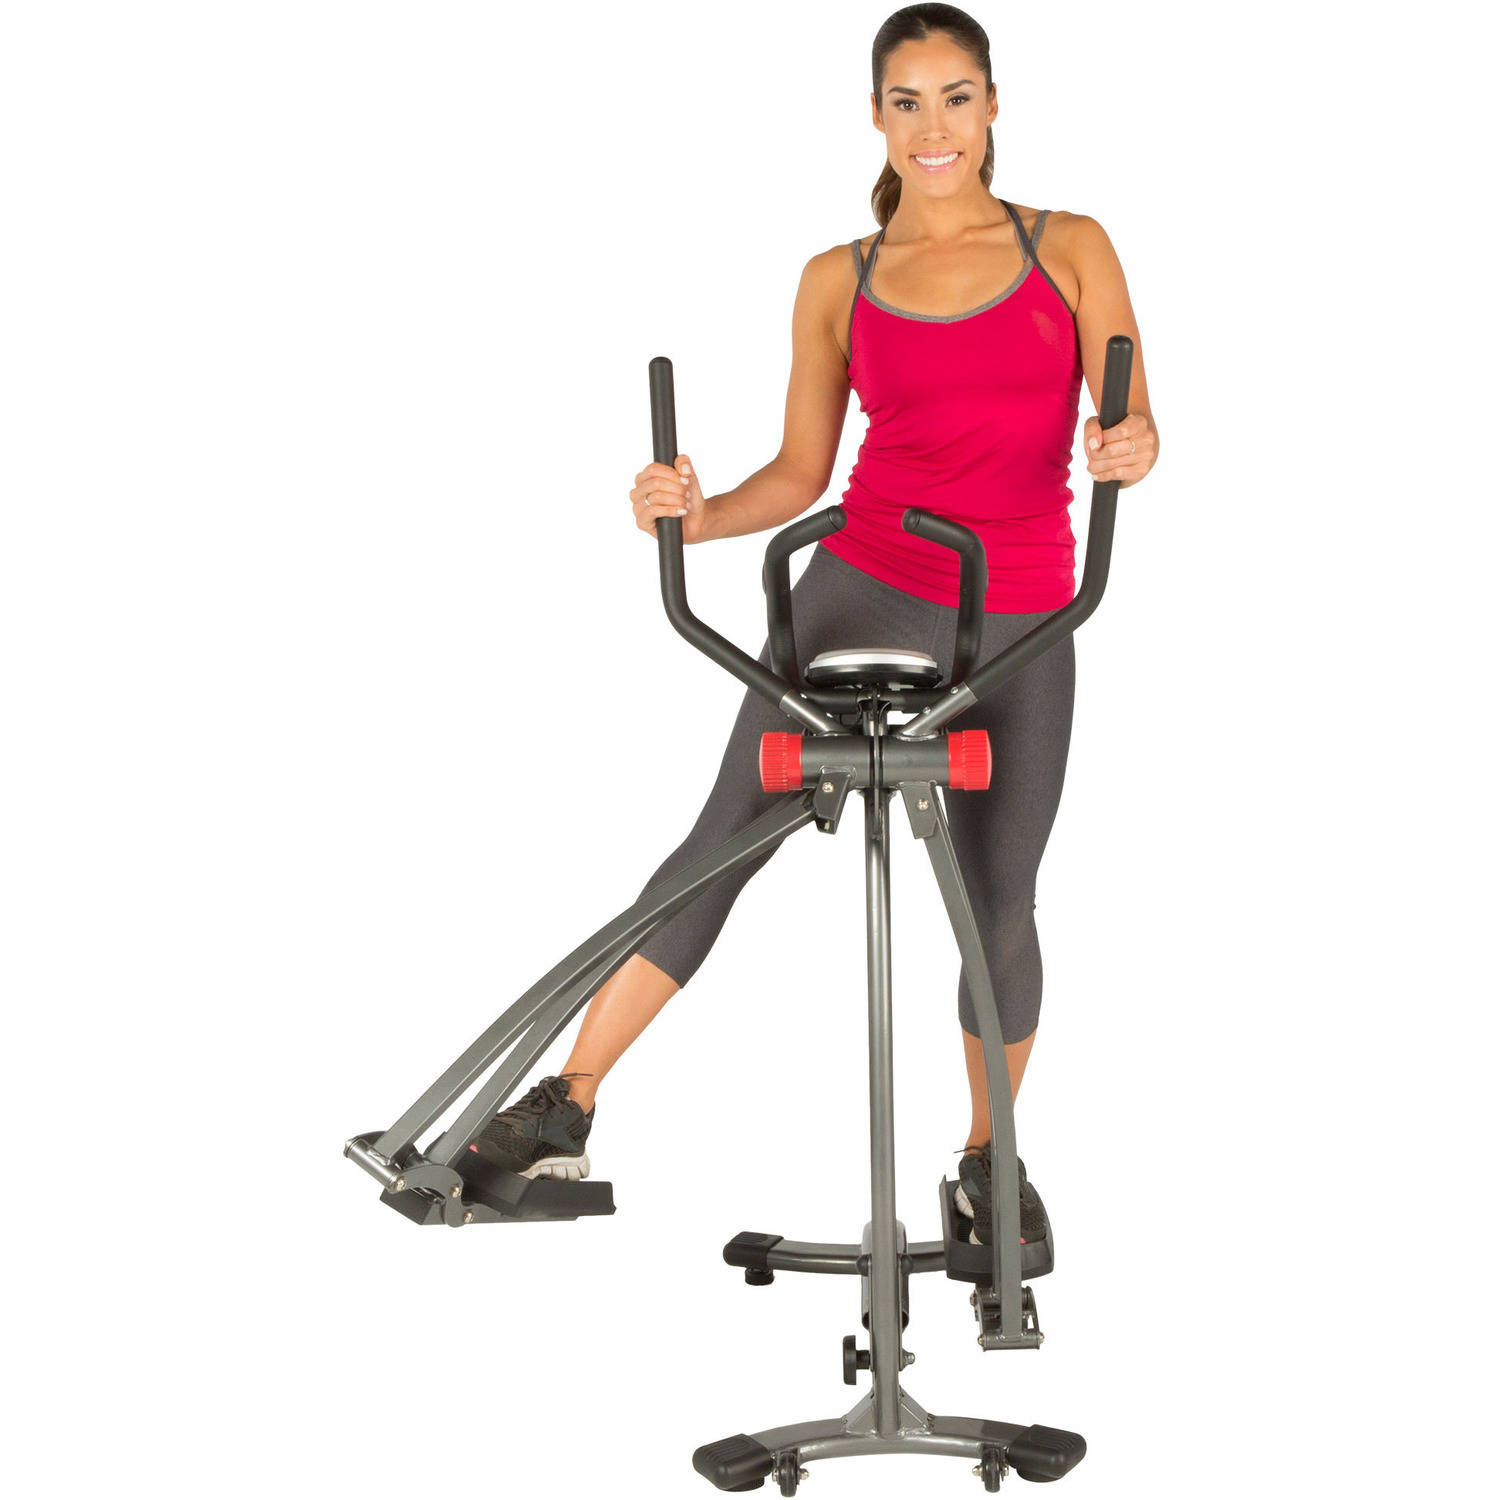 Fitness Reality Multi-Direction Elliptical Cloud Walker X1 with Pulse Sensors - image 25 of 31